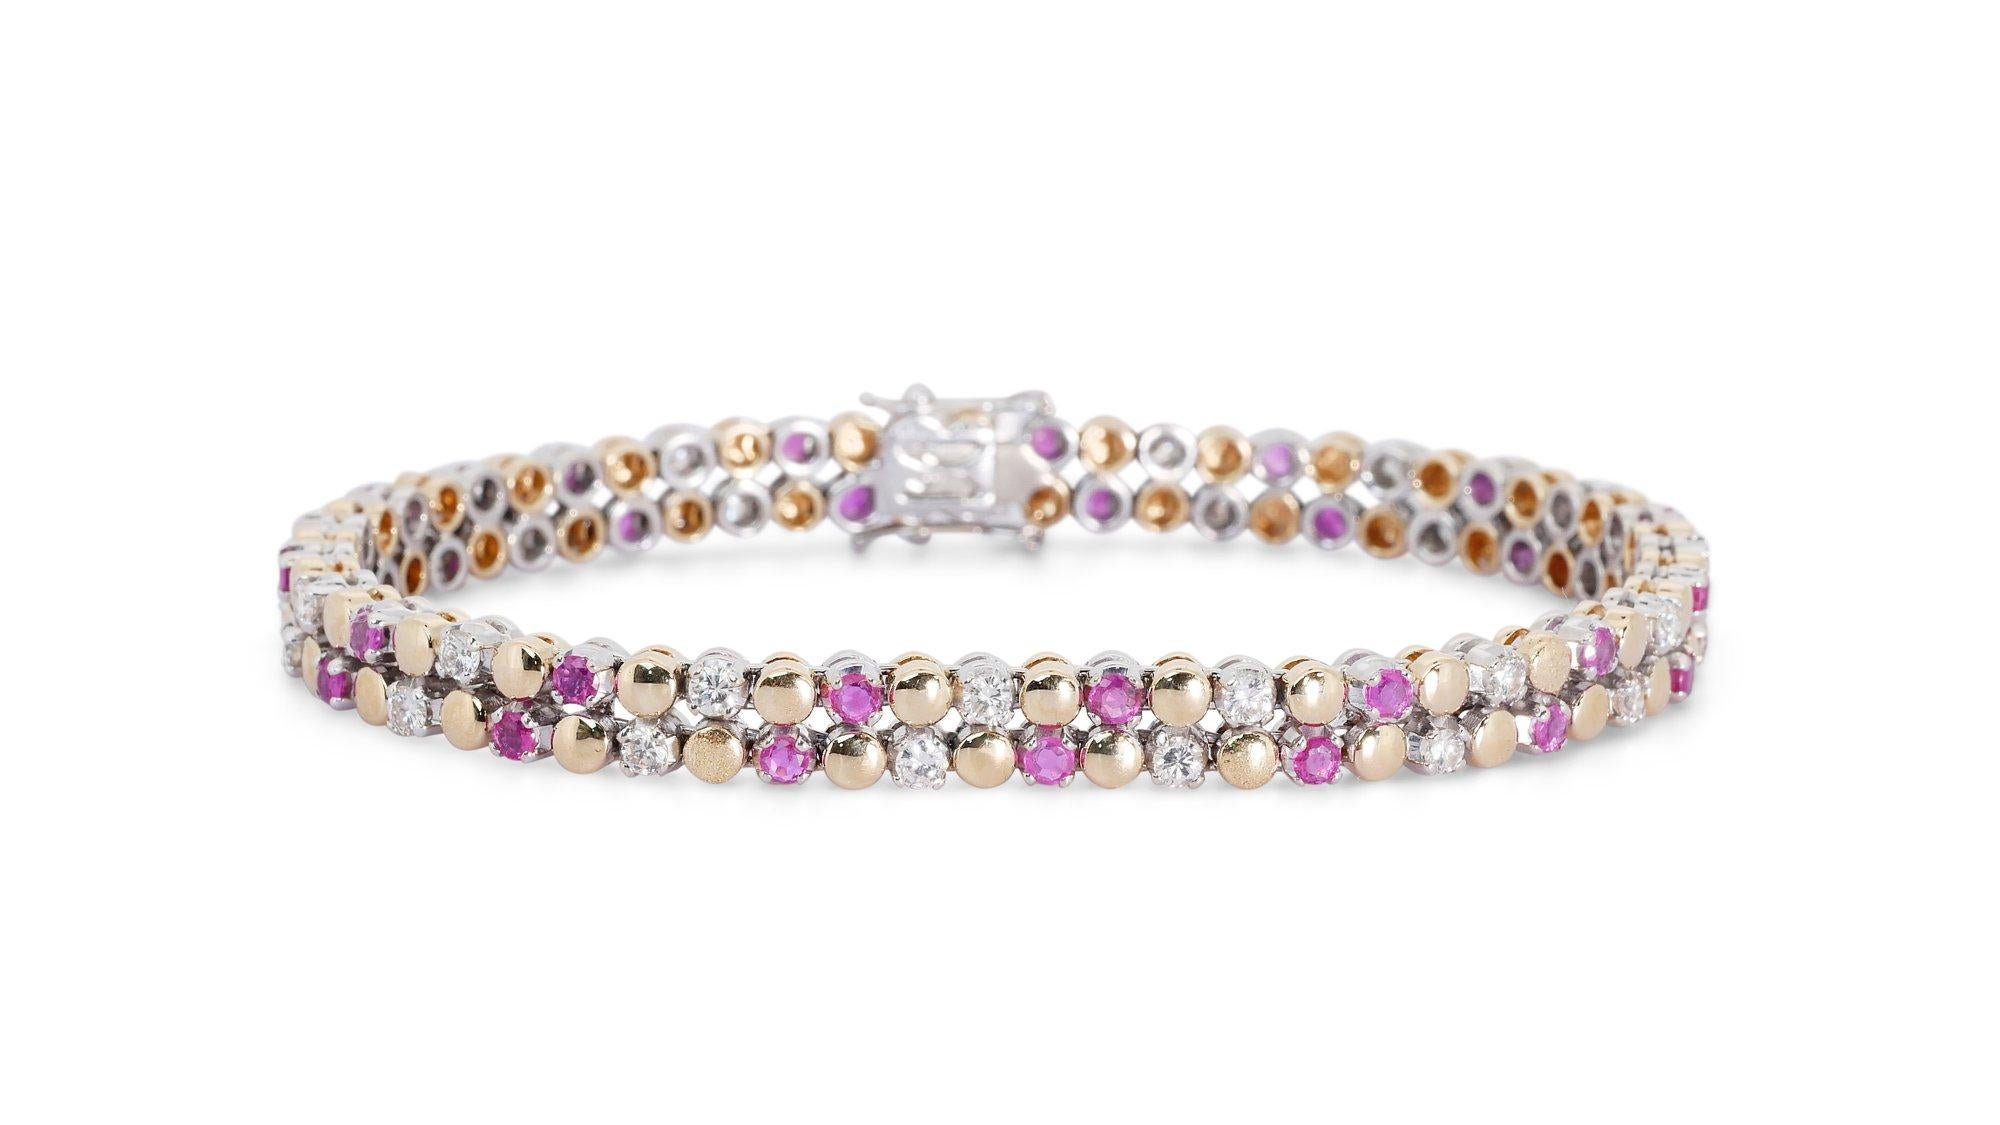 Colorful 18K White Gold Bracelet w/ 2.7 ct Ruby and Natural Diamonds IGI Cert In Excellent Condition For Sale In רמת גן, IL